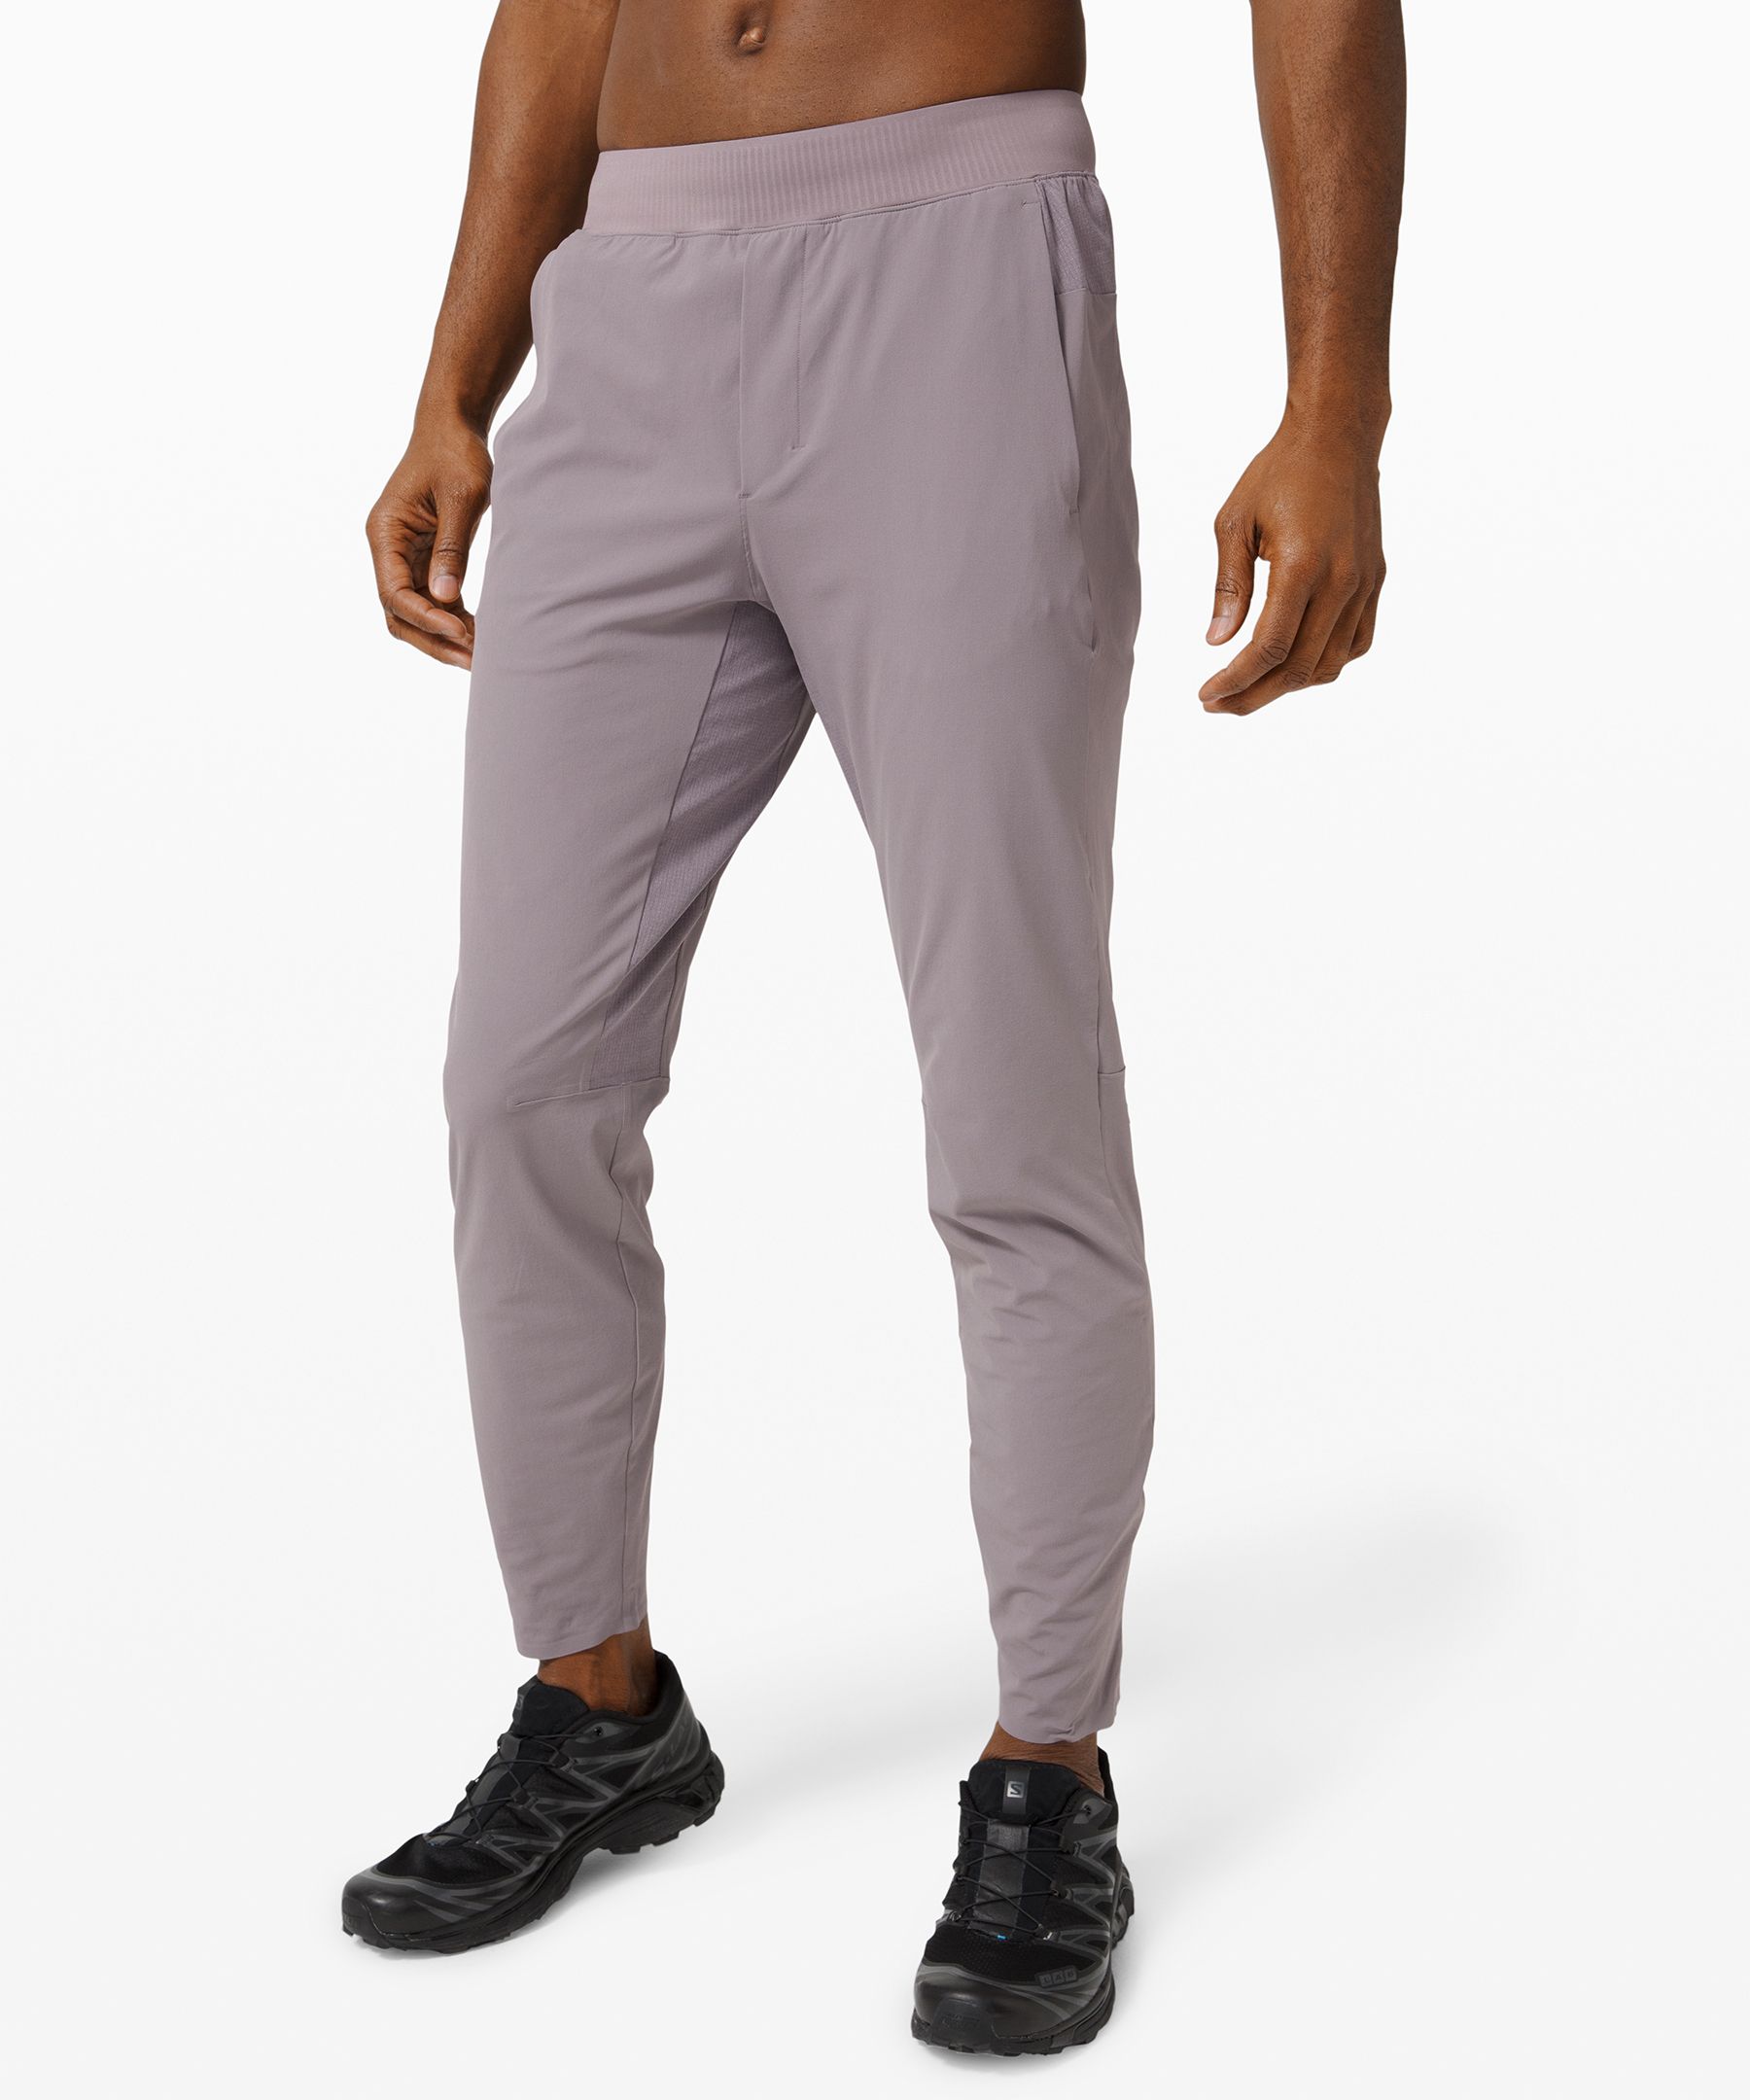 In Mind Pant 30, Joggers